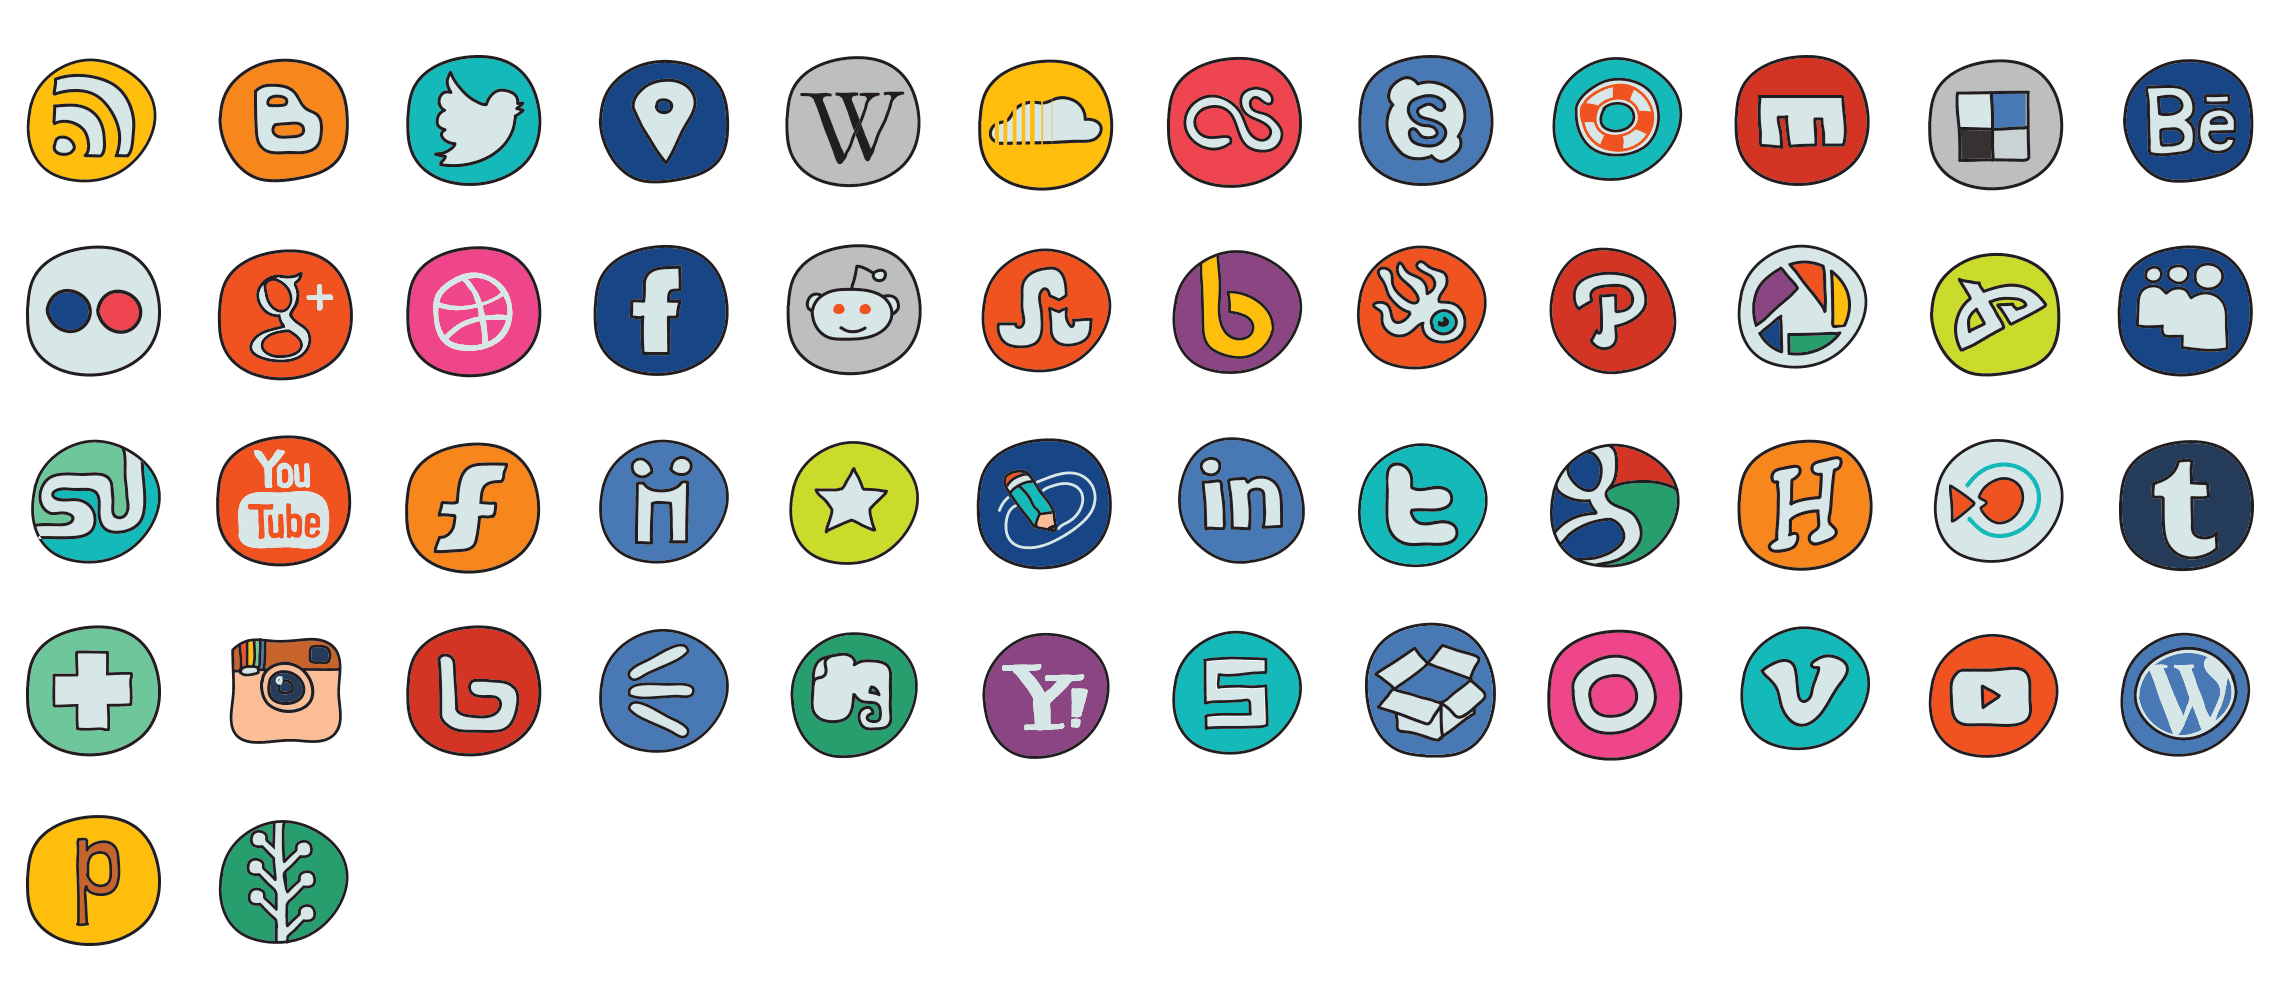 Social-Media-doodle-icons-1